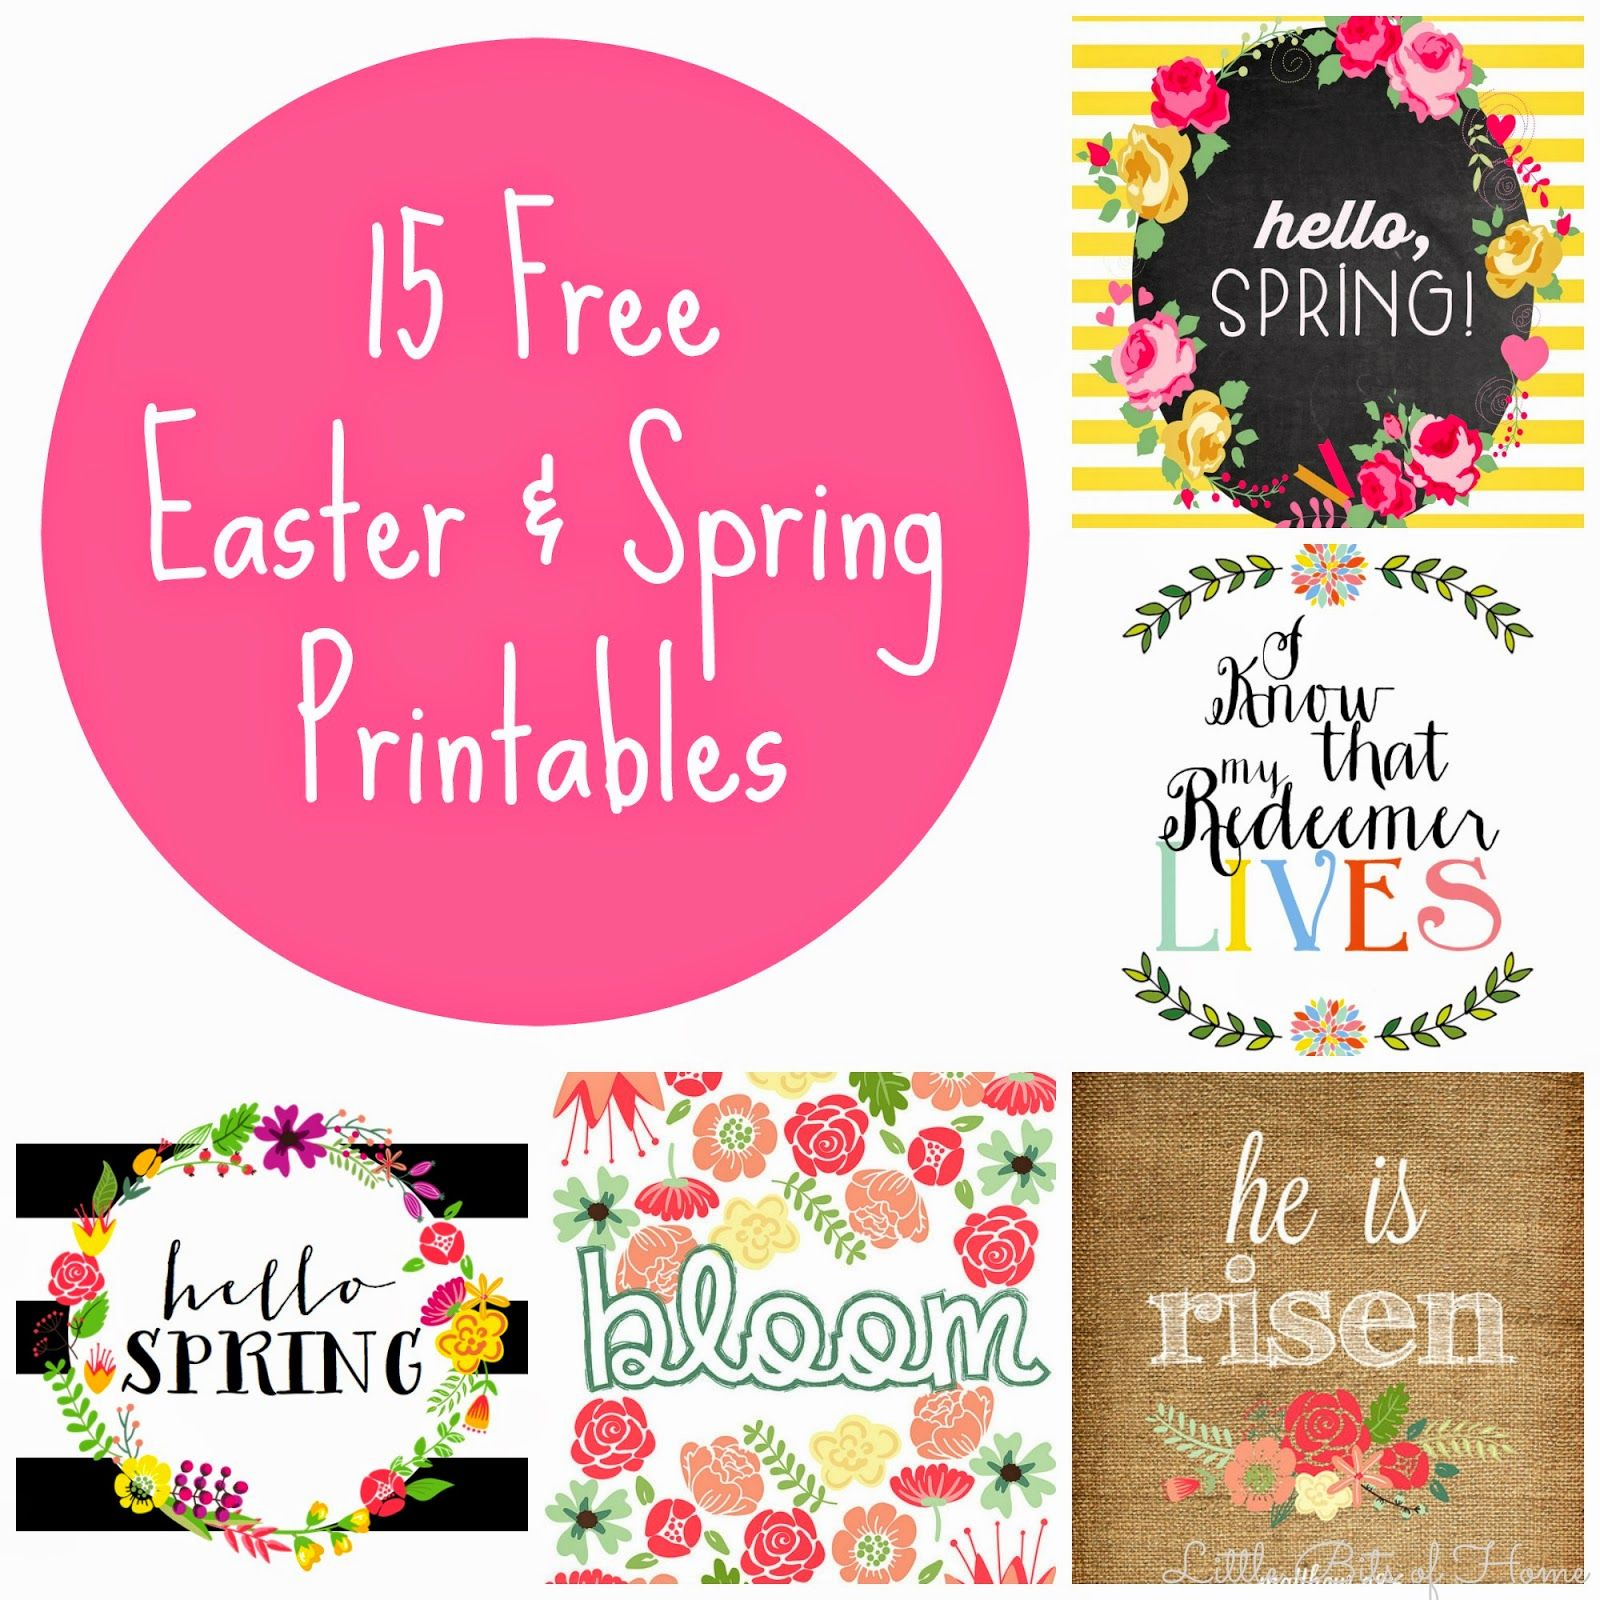 15 Free Spring And Easter Printables | Artsy Stuff | Pinterest - Free Printable Spring Decorations